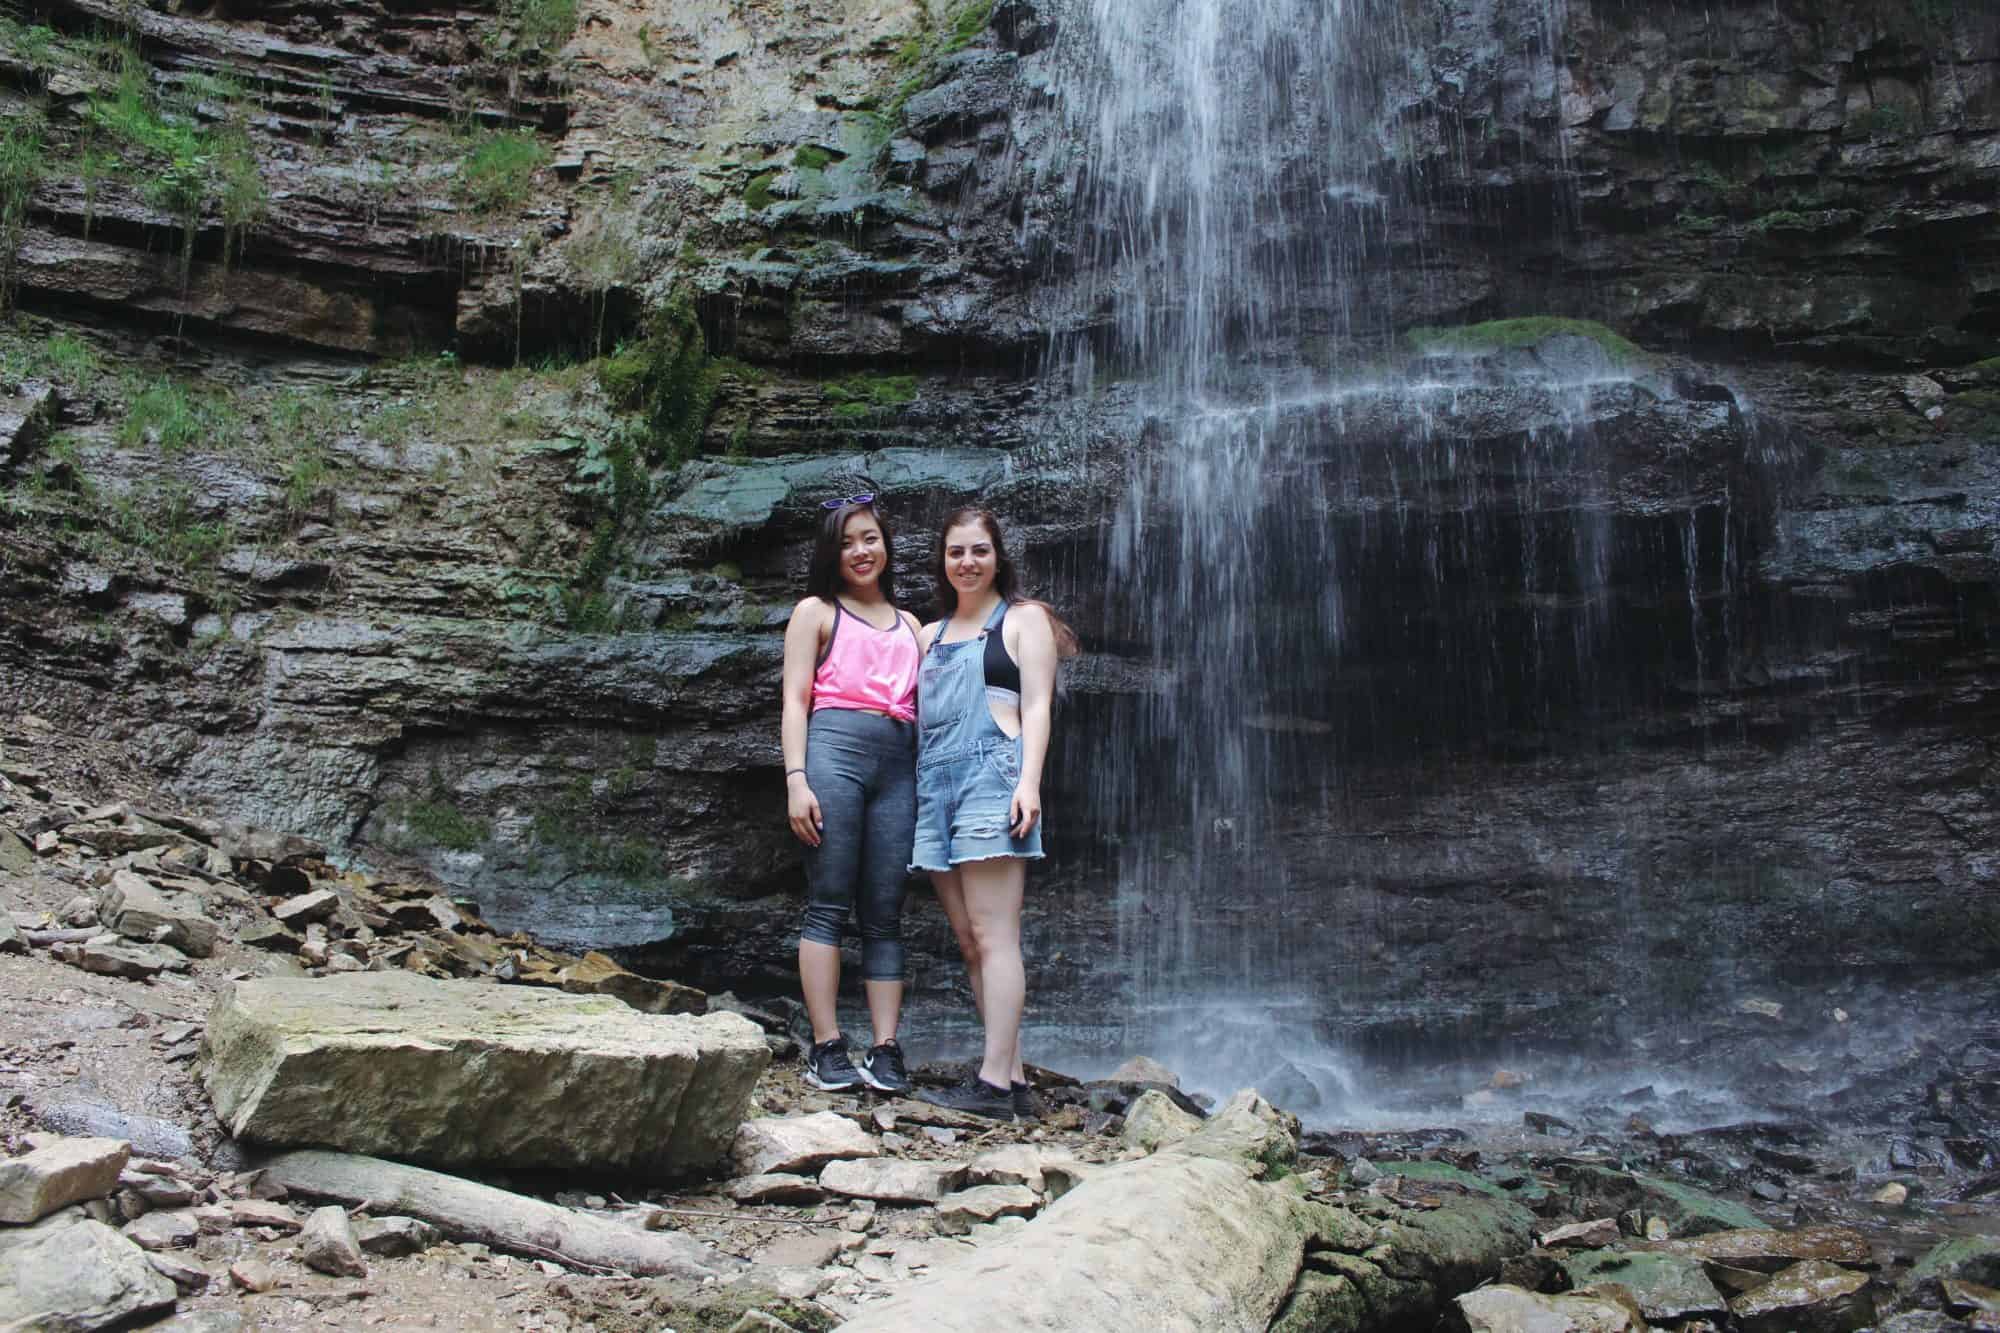 Summer road trip in Hamilton, Ontario | how to spend a day in Hamilton, Ontario, Canada | best things to do in Dundas, ON | Hamilton city guide | Diary of a Toronto Girl, a Canadian lifestyle blog